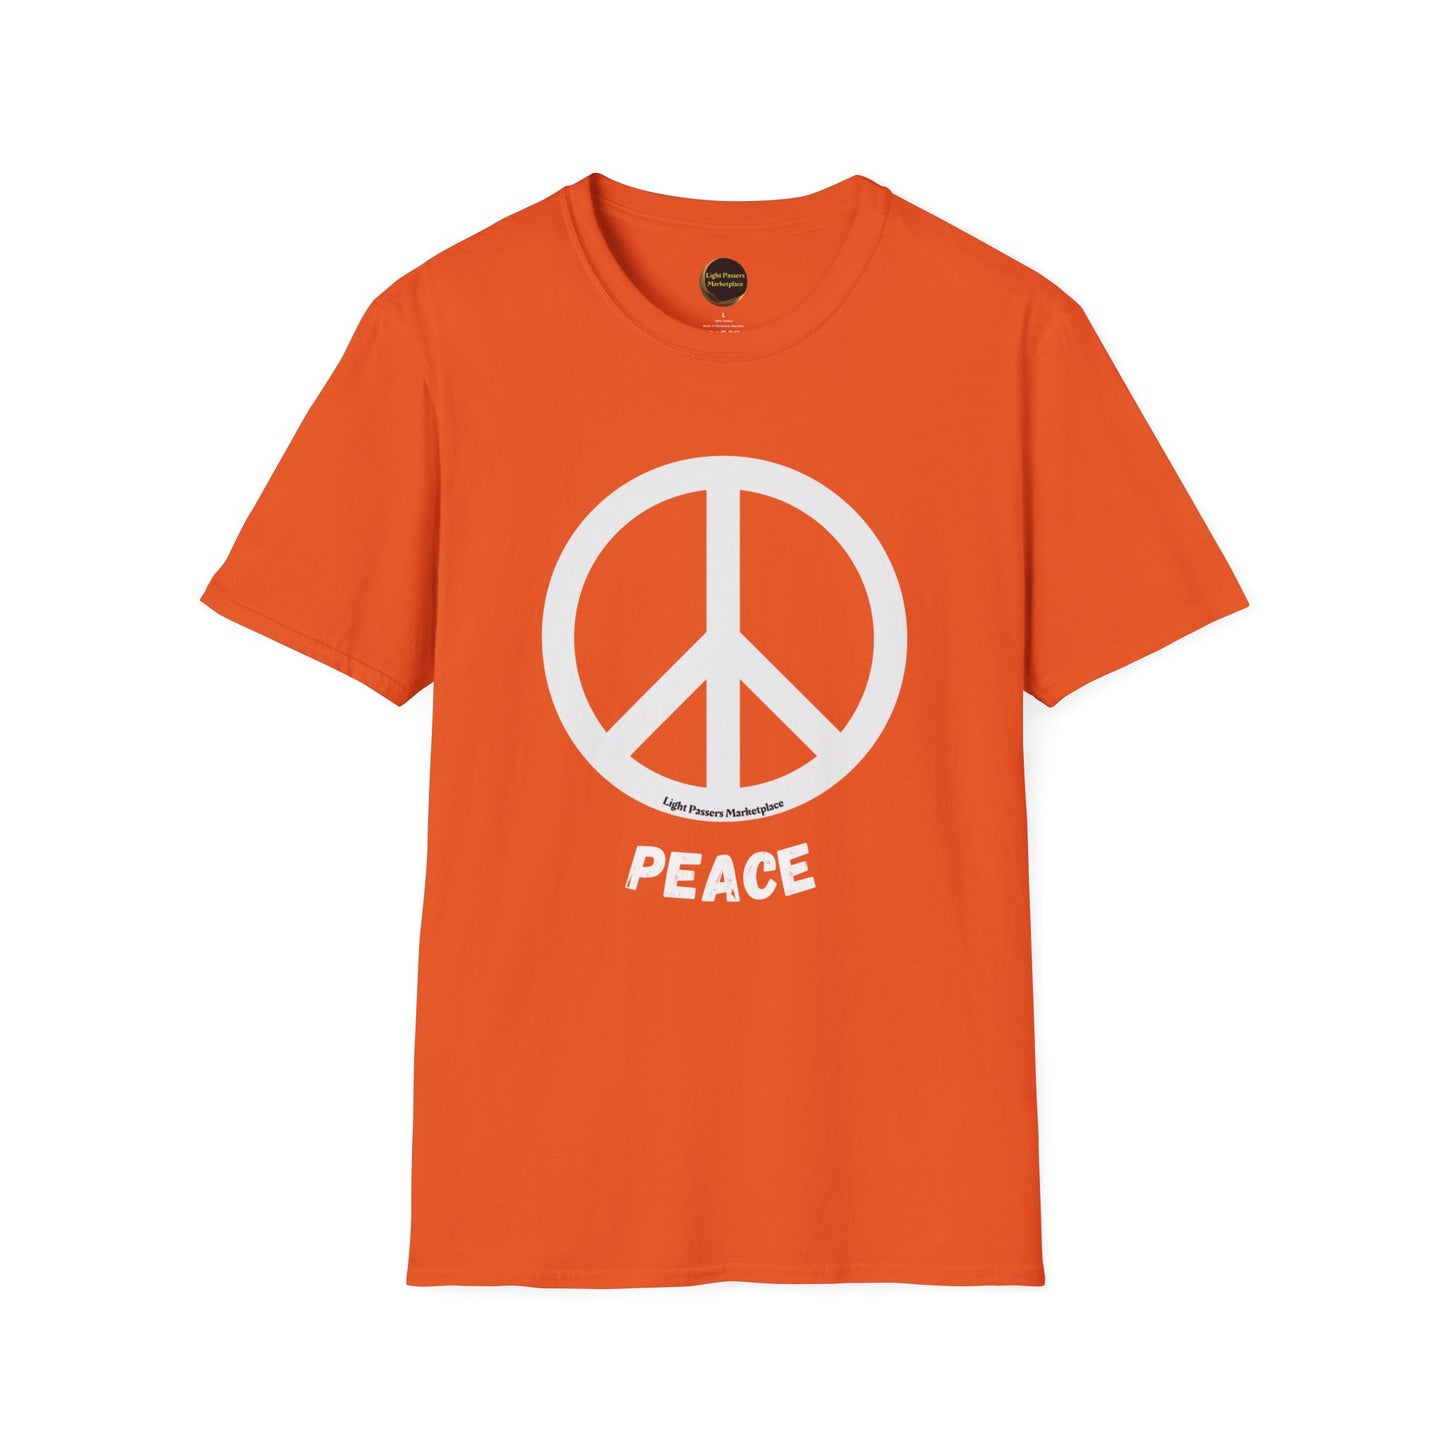 A close-up of a black or white unisex t-shirt featuring a peace sign design. Made of soft 100% cotton with twill tape shoulders and a ribbed collar for durability and comfort.